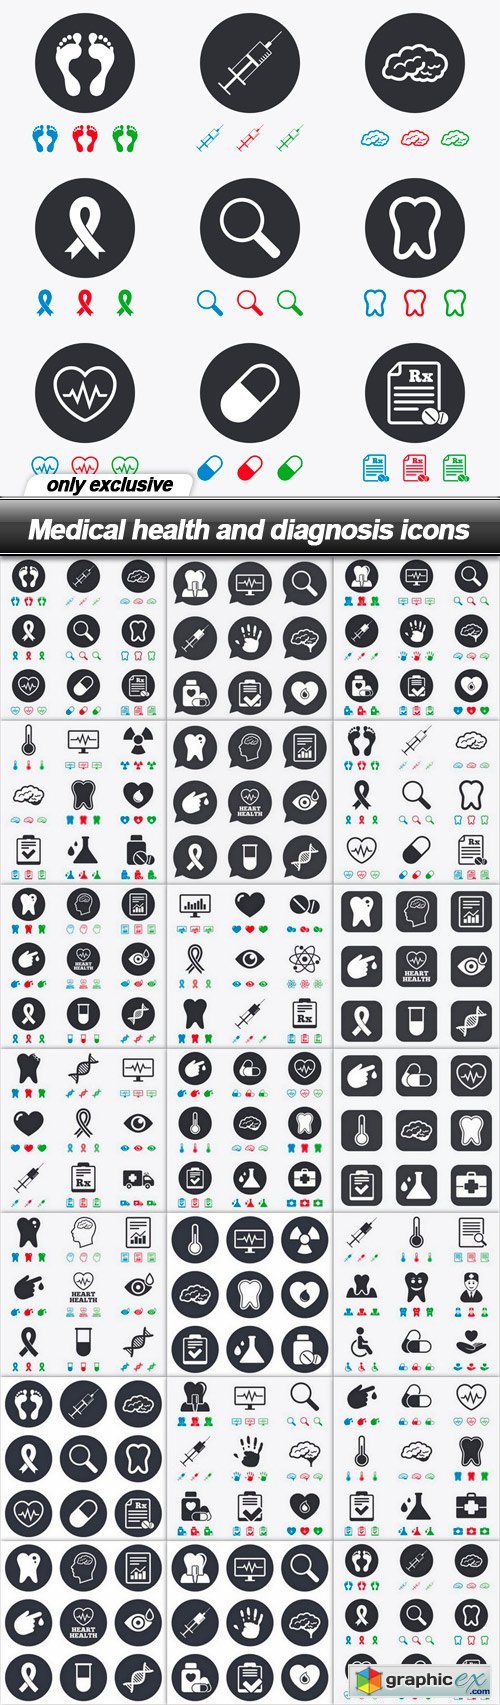 Medical health and diagnosis icons - 20 EPS